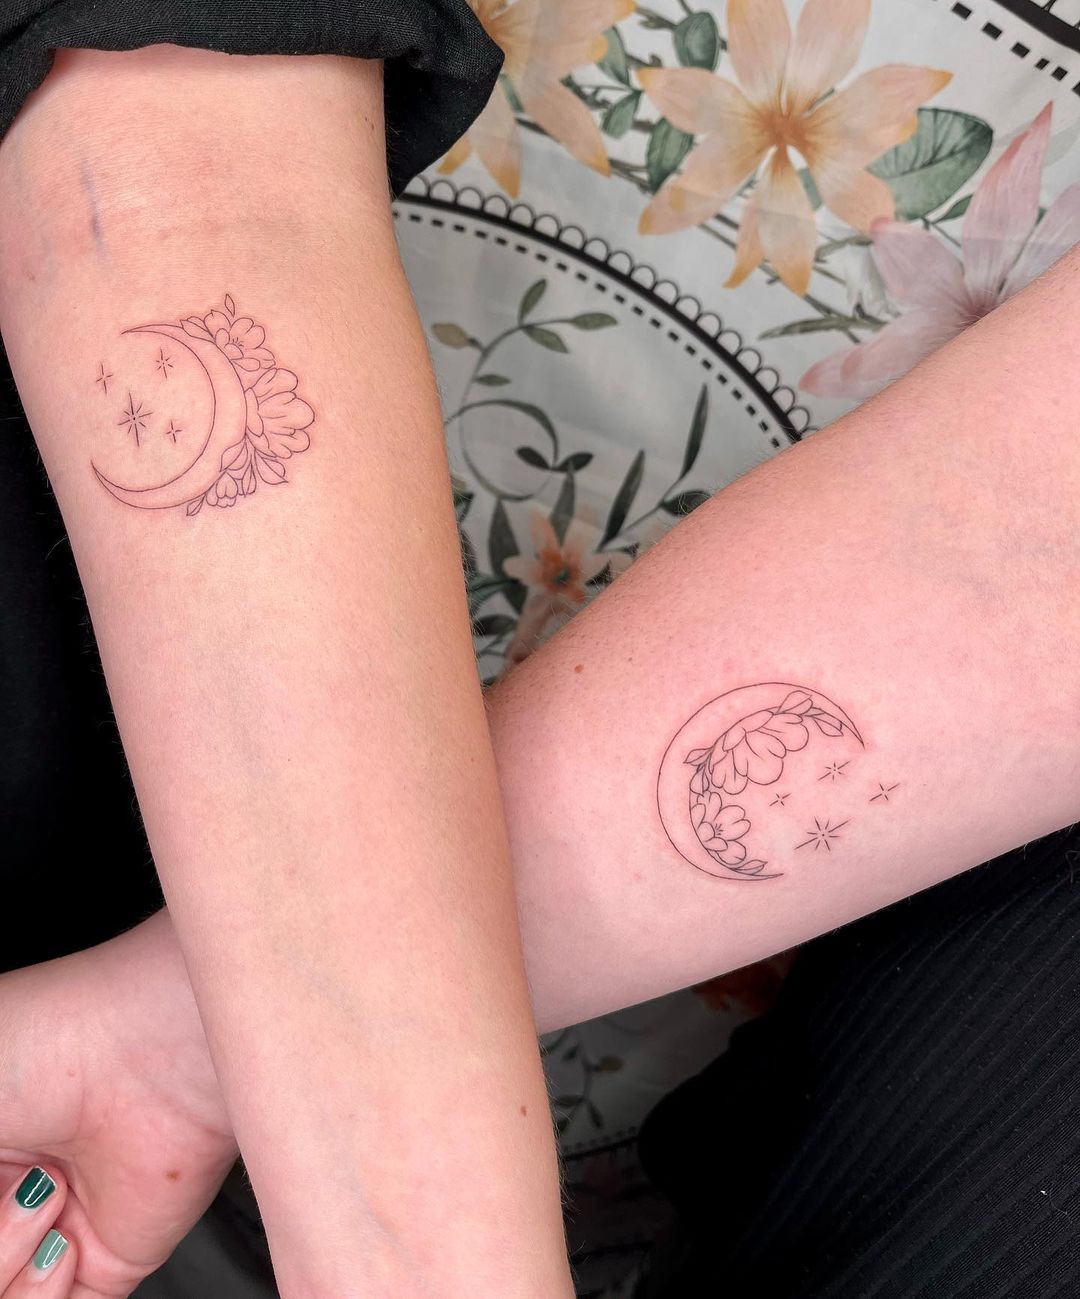 20 matching sun and moon tattoos for best friends and couples - Tuko.co.ke